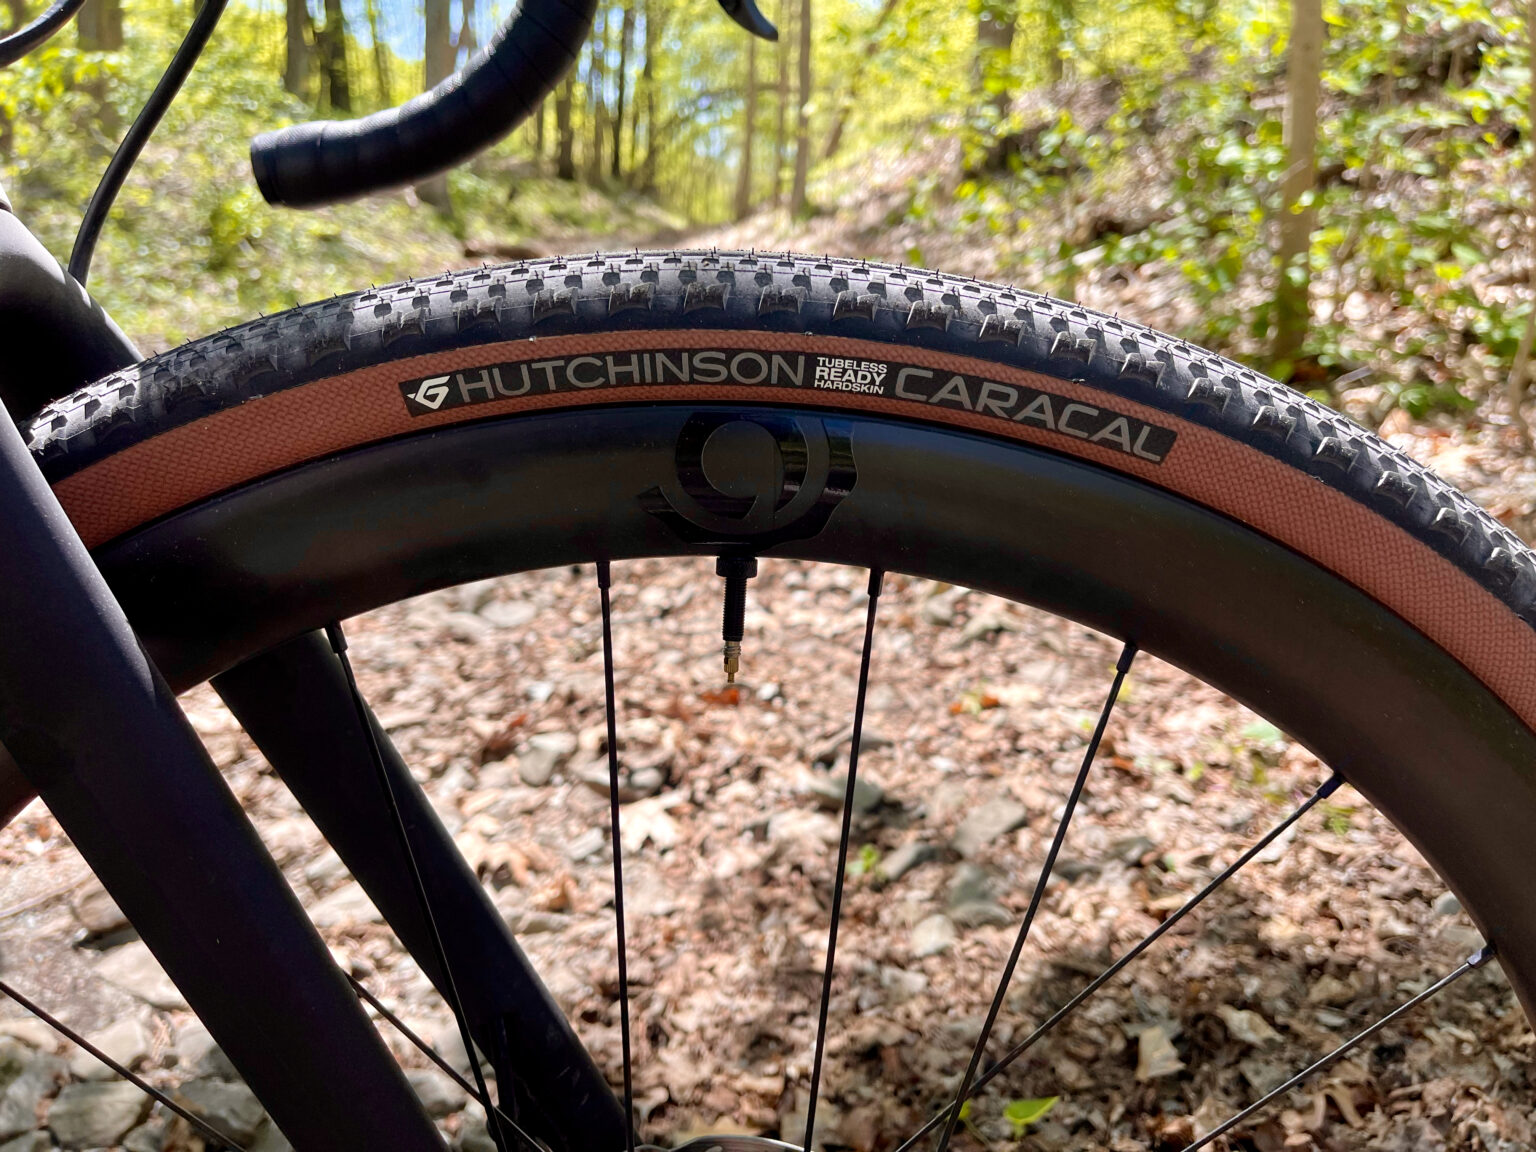 Hutchinson Caracal gravel tire front